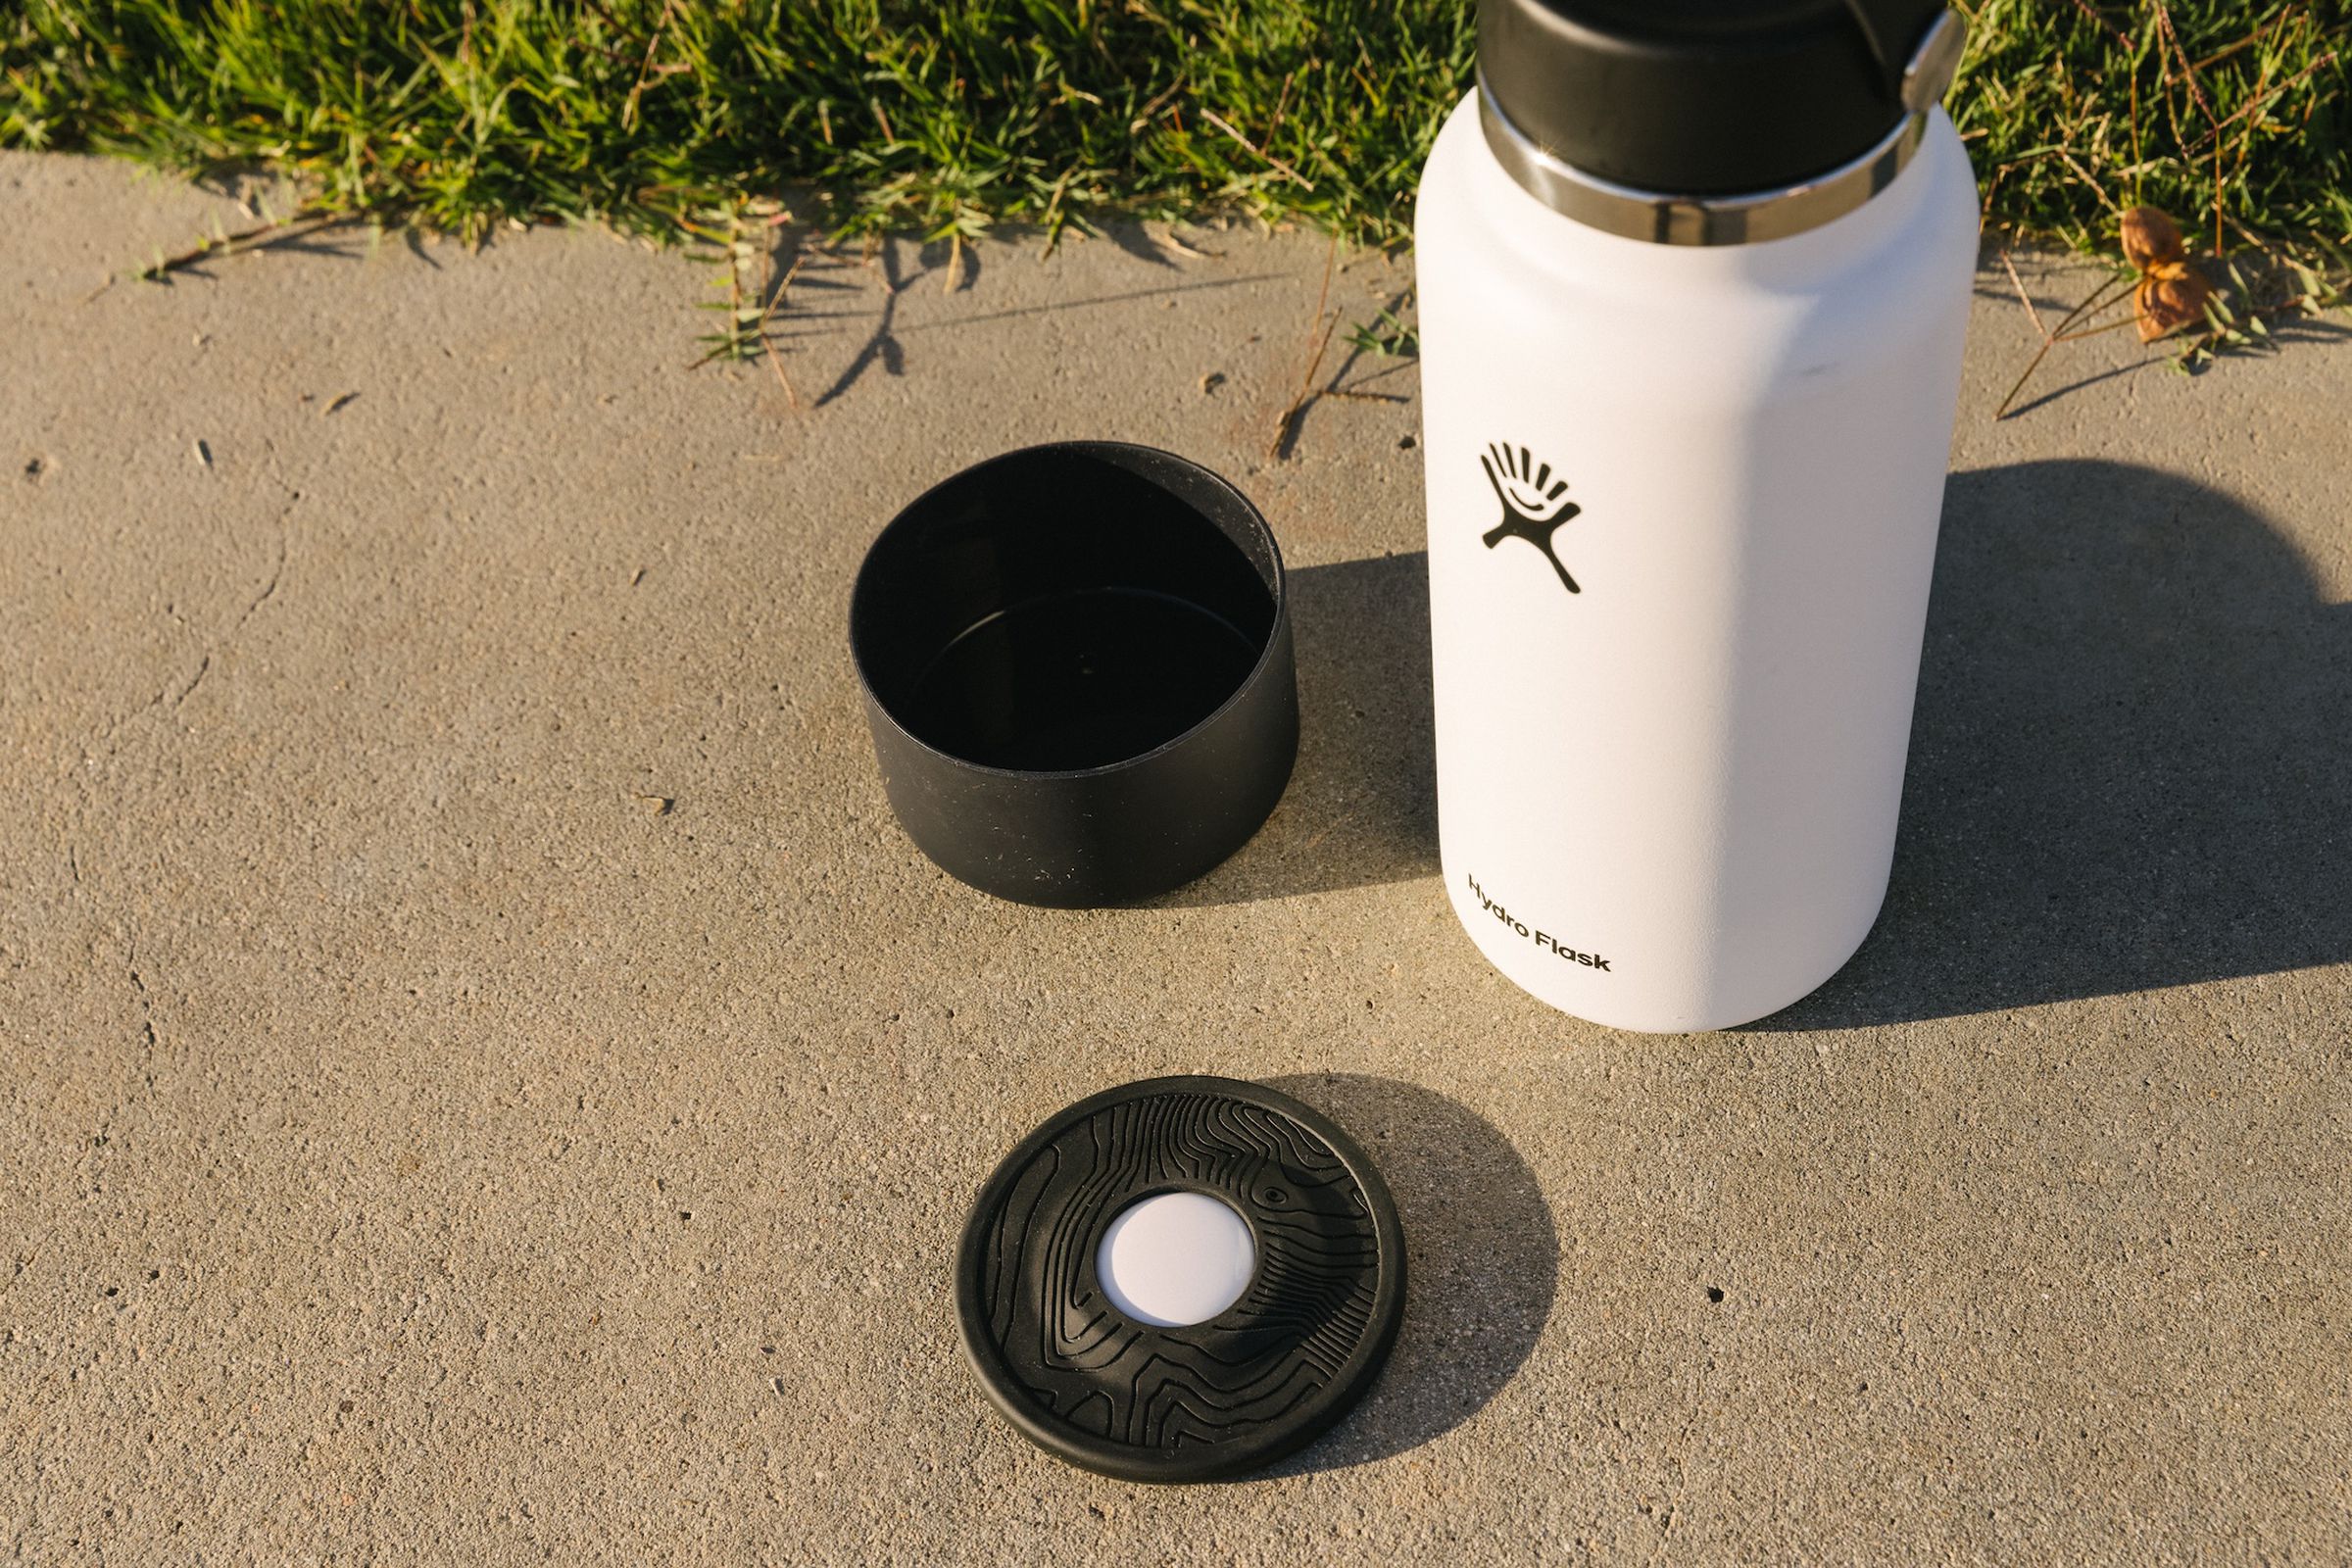 A picture of the Hydro Flask on a concrete surface, next to a Flex Boot and a Hydro Flask Tracker, which has an AirTag sitting in it.